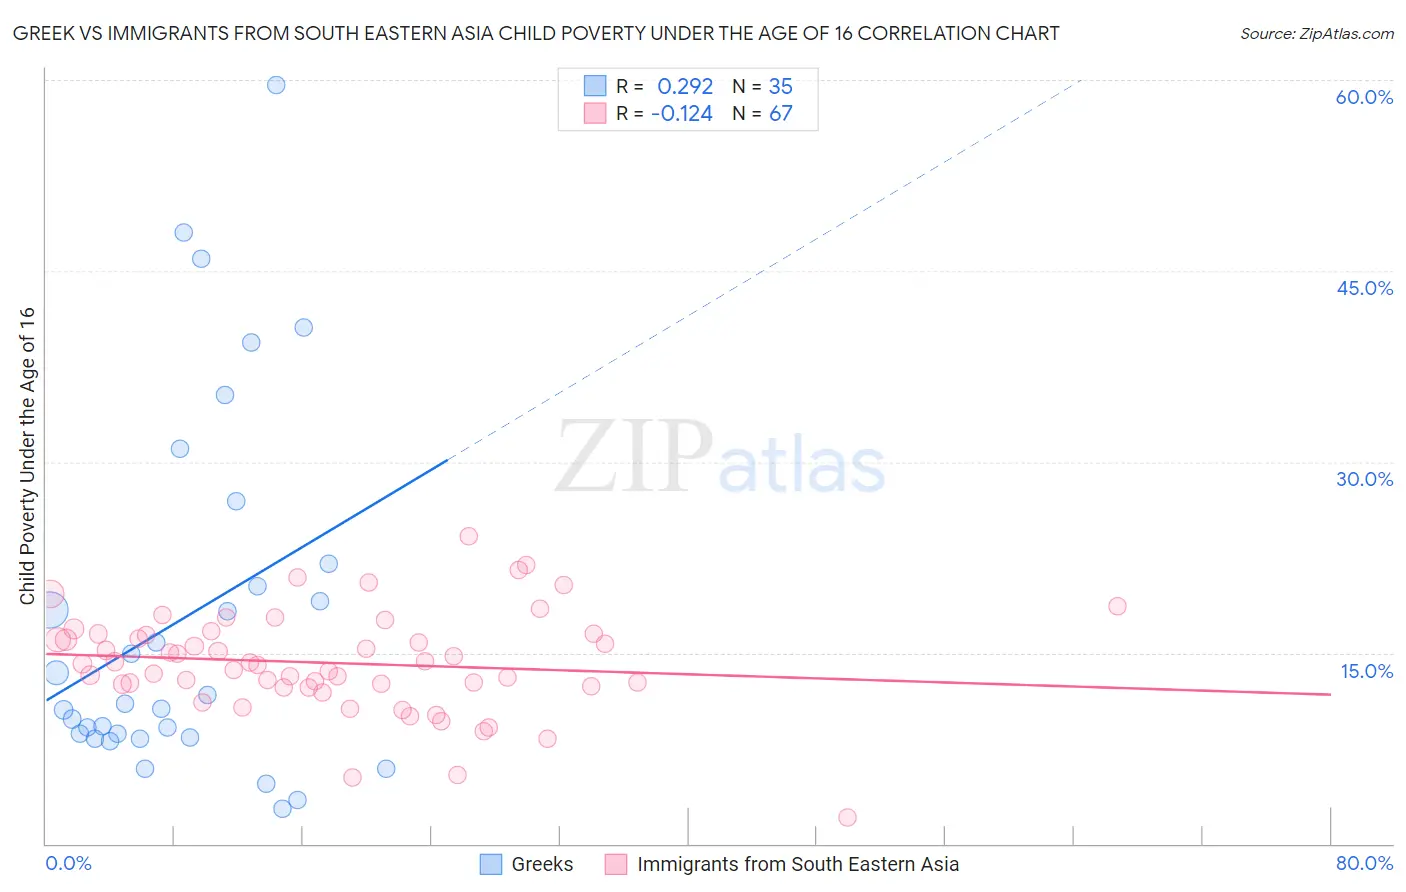 Greek vs Immigrants from South Eastern Asia Child Poverty Under the Age of 16